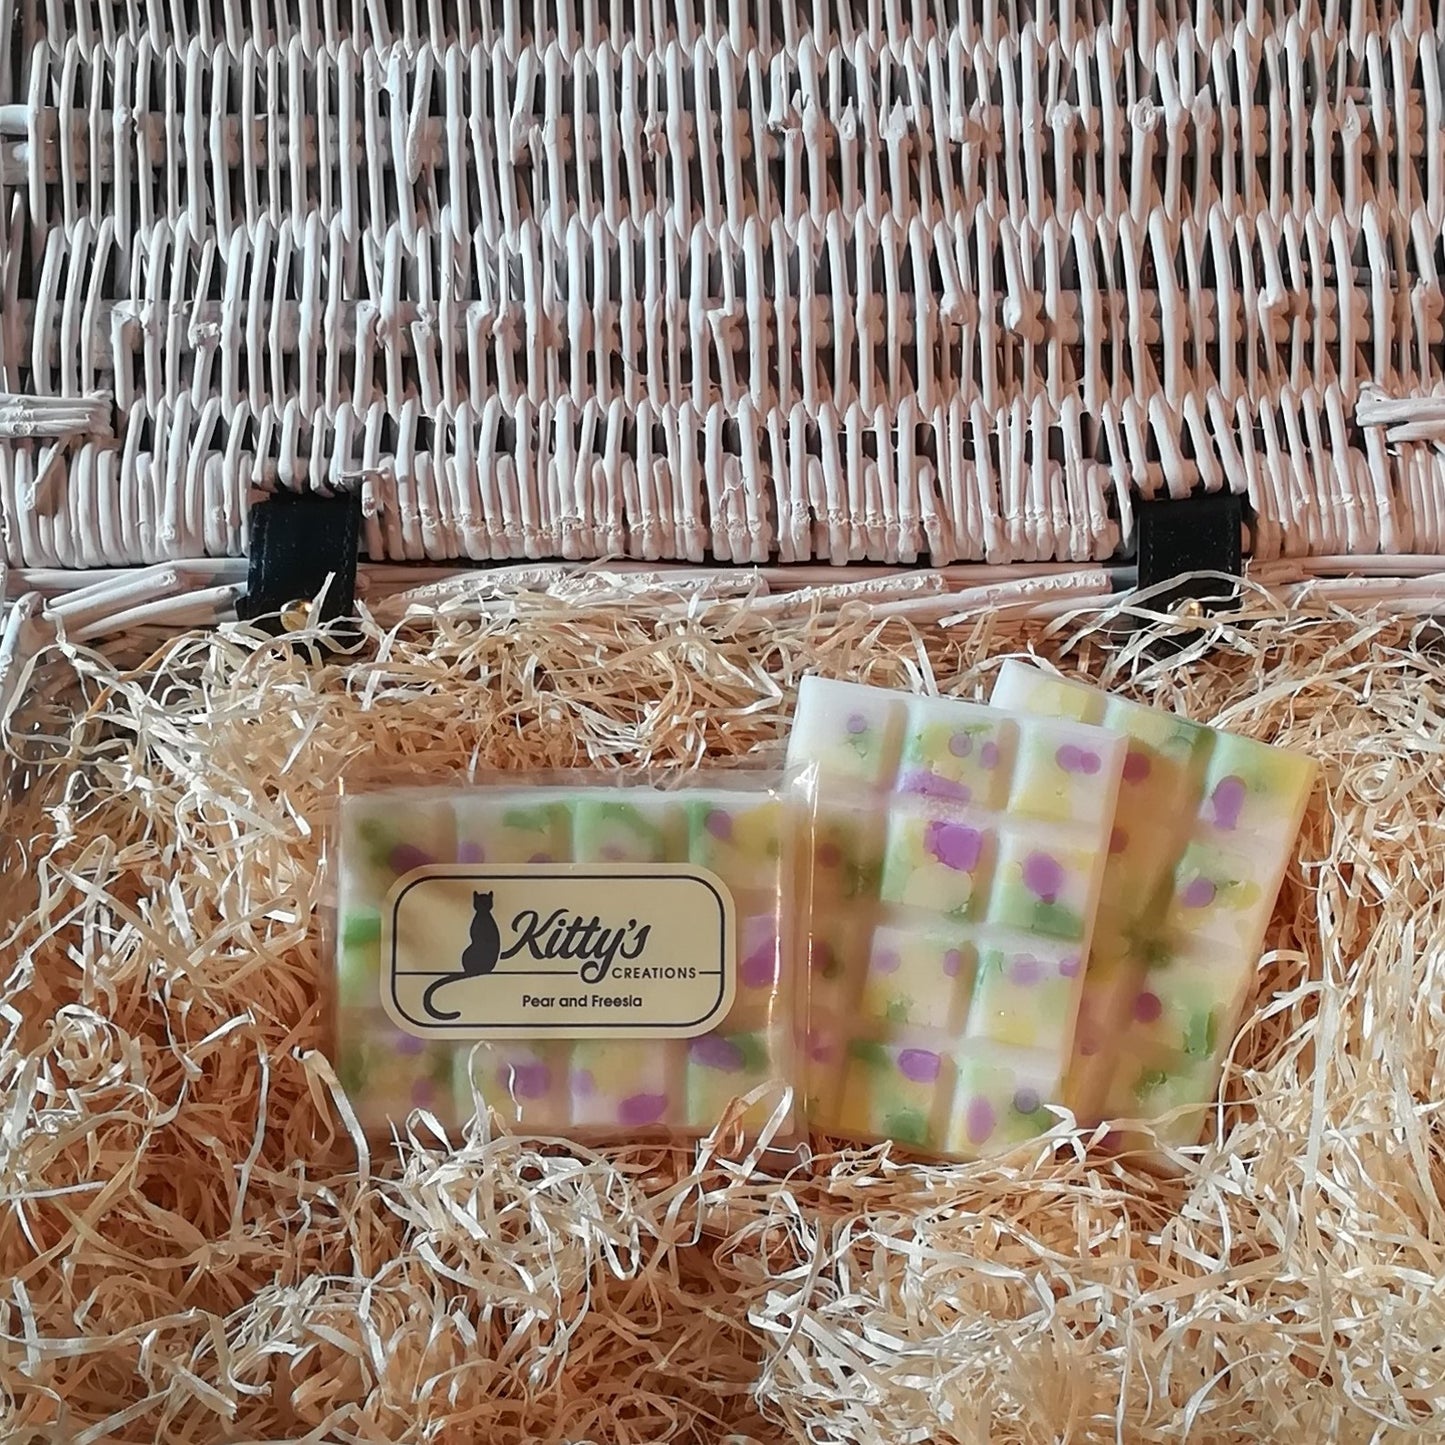 Three hand-made rectangular Wax Melts. Each is a natural wax cream colour, overlaid with fresh pear green, light yellow and purple speckles and resting in a basket of straw. Each melt bursting with the delicious aroma of fruity Pear entwining with the freshness of Freesia, combining to awaken and invigorate your senses.